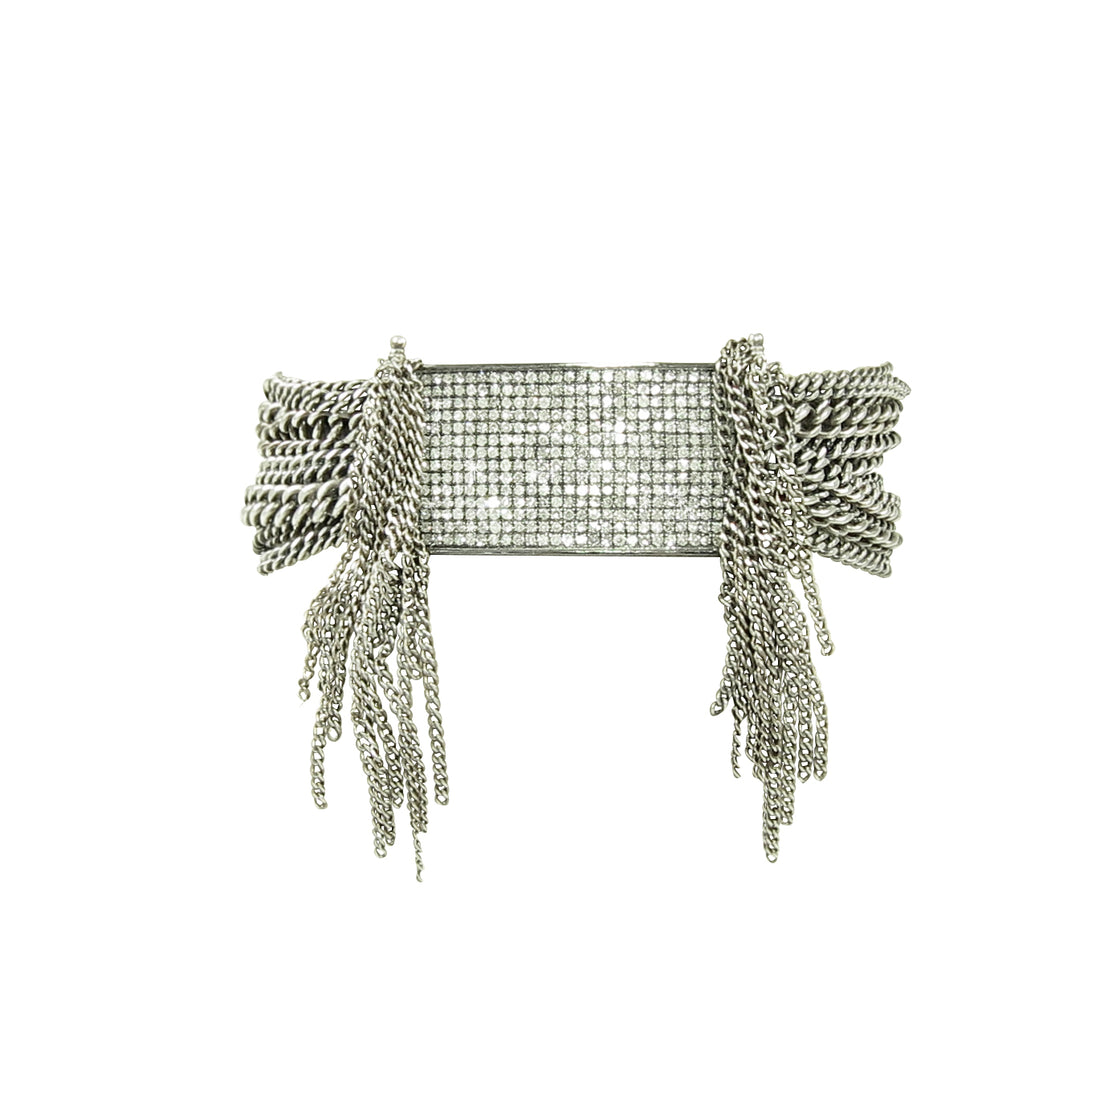 Fiery diamond ID bracelet and chain with lots of fringe and magnetic clasp